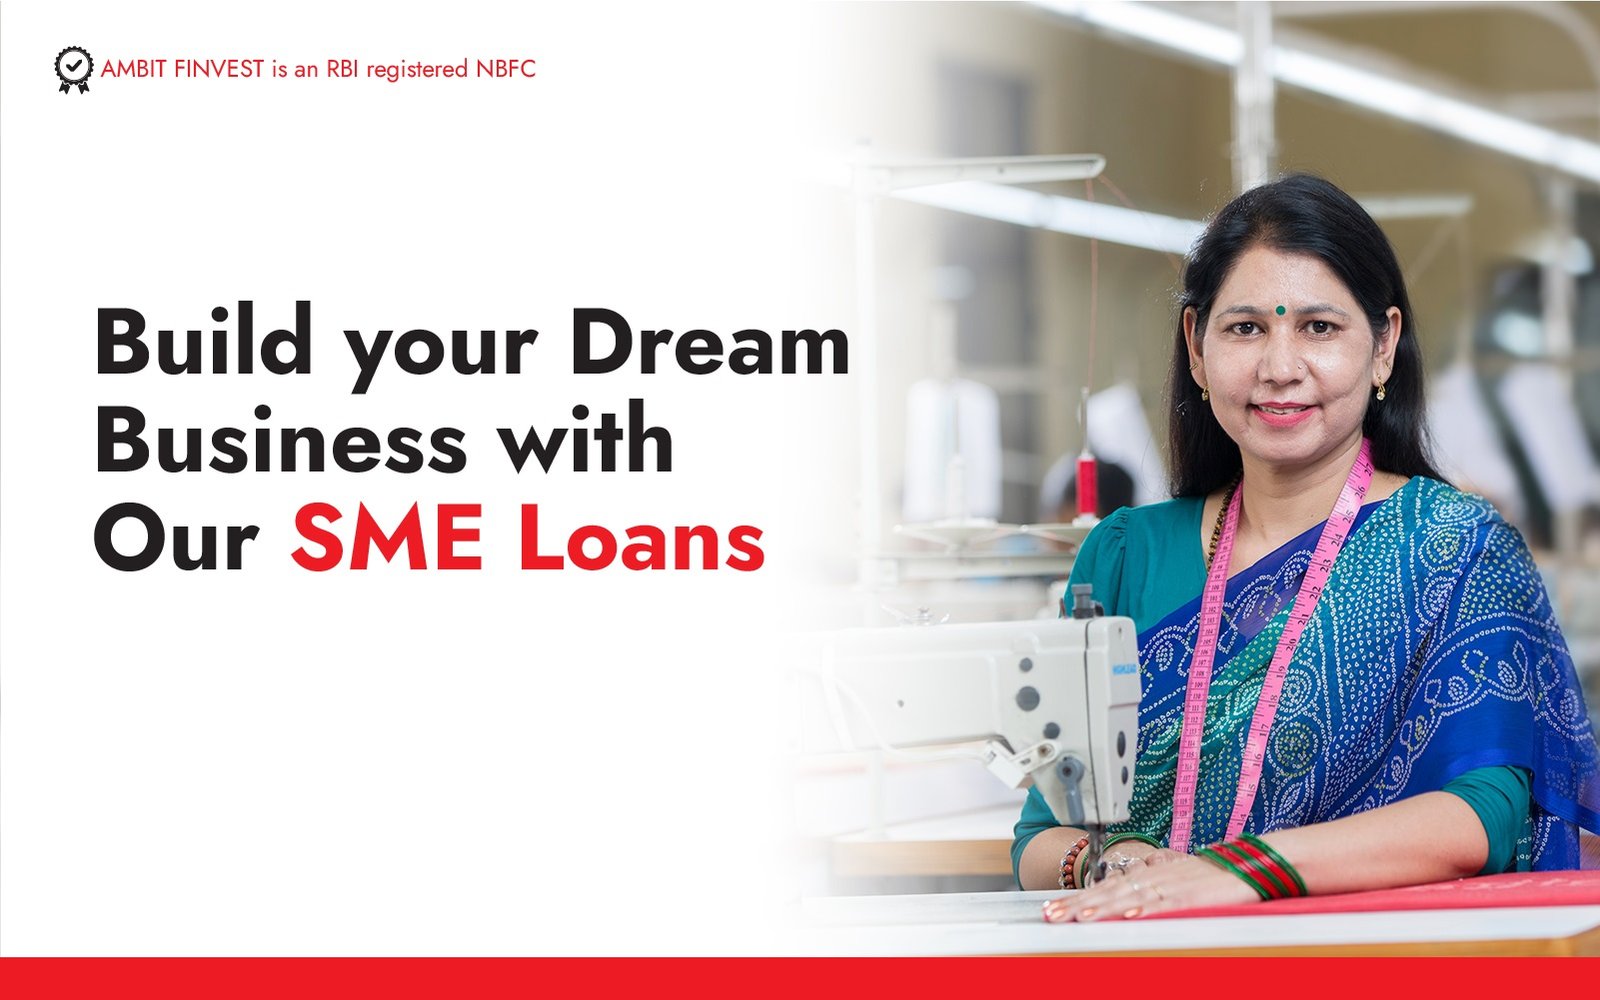 Ambit Finvest Secures Strategic Investment of ₹690 Crore to Bolster MSME Lending and Empower India's Growth Engine